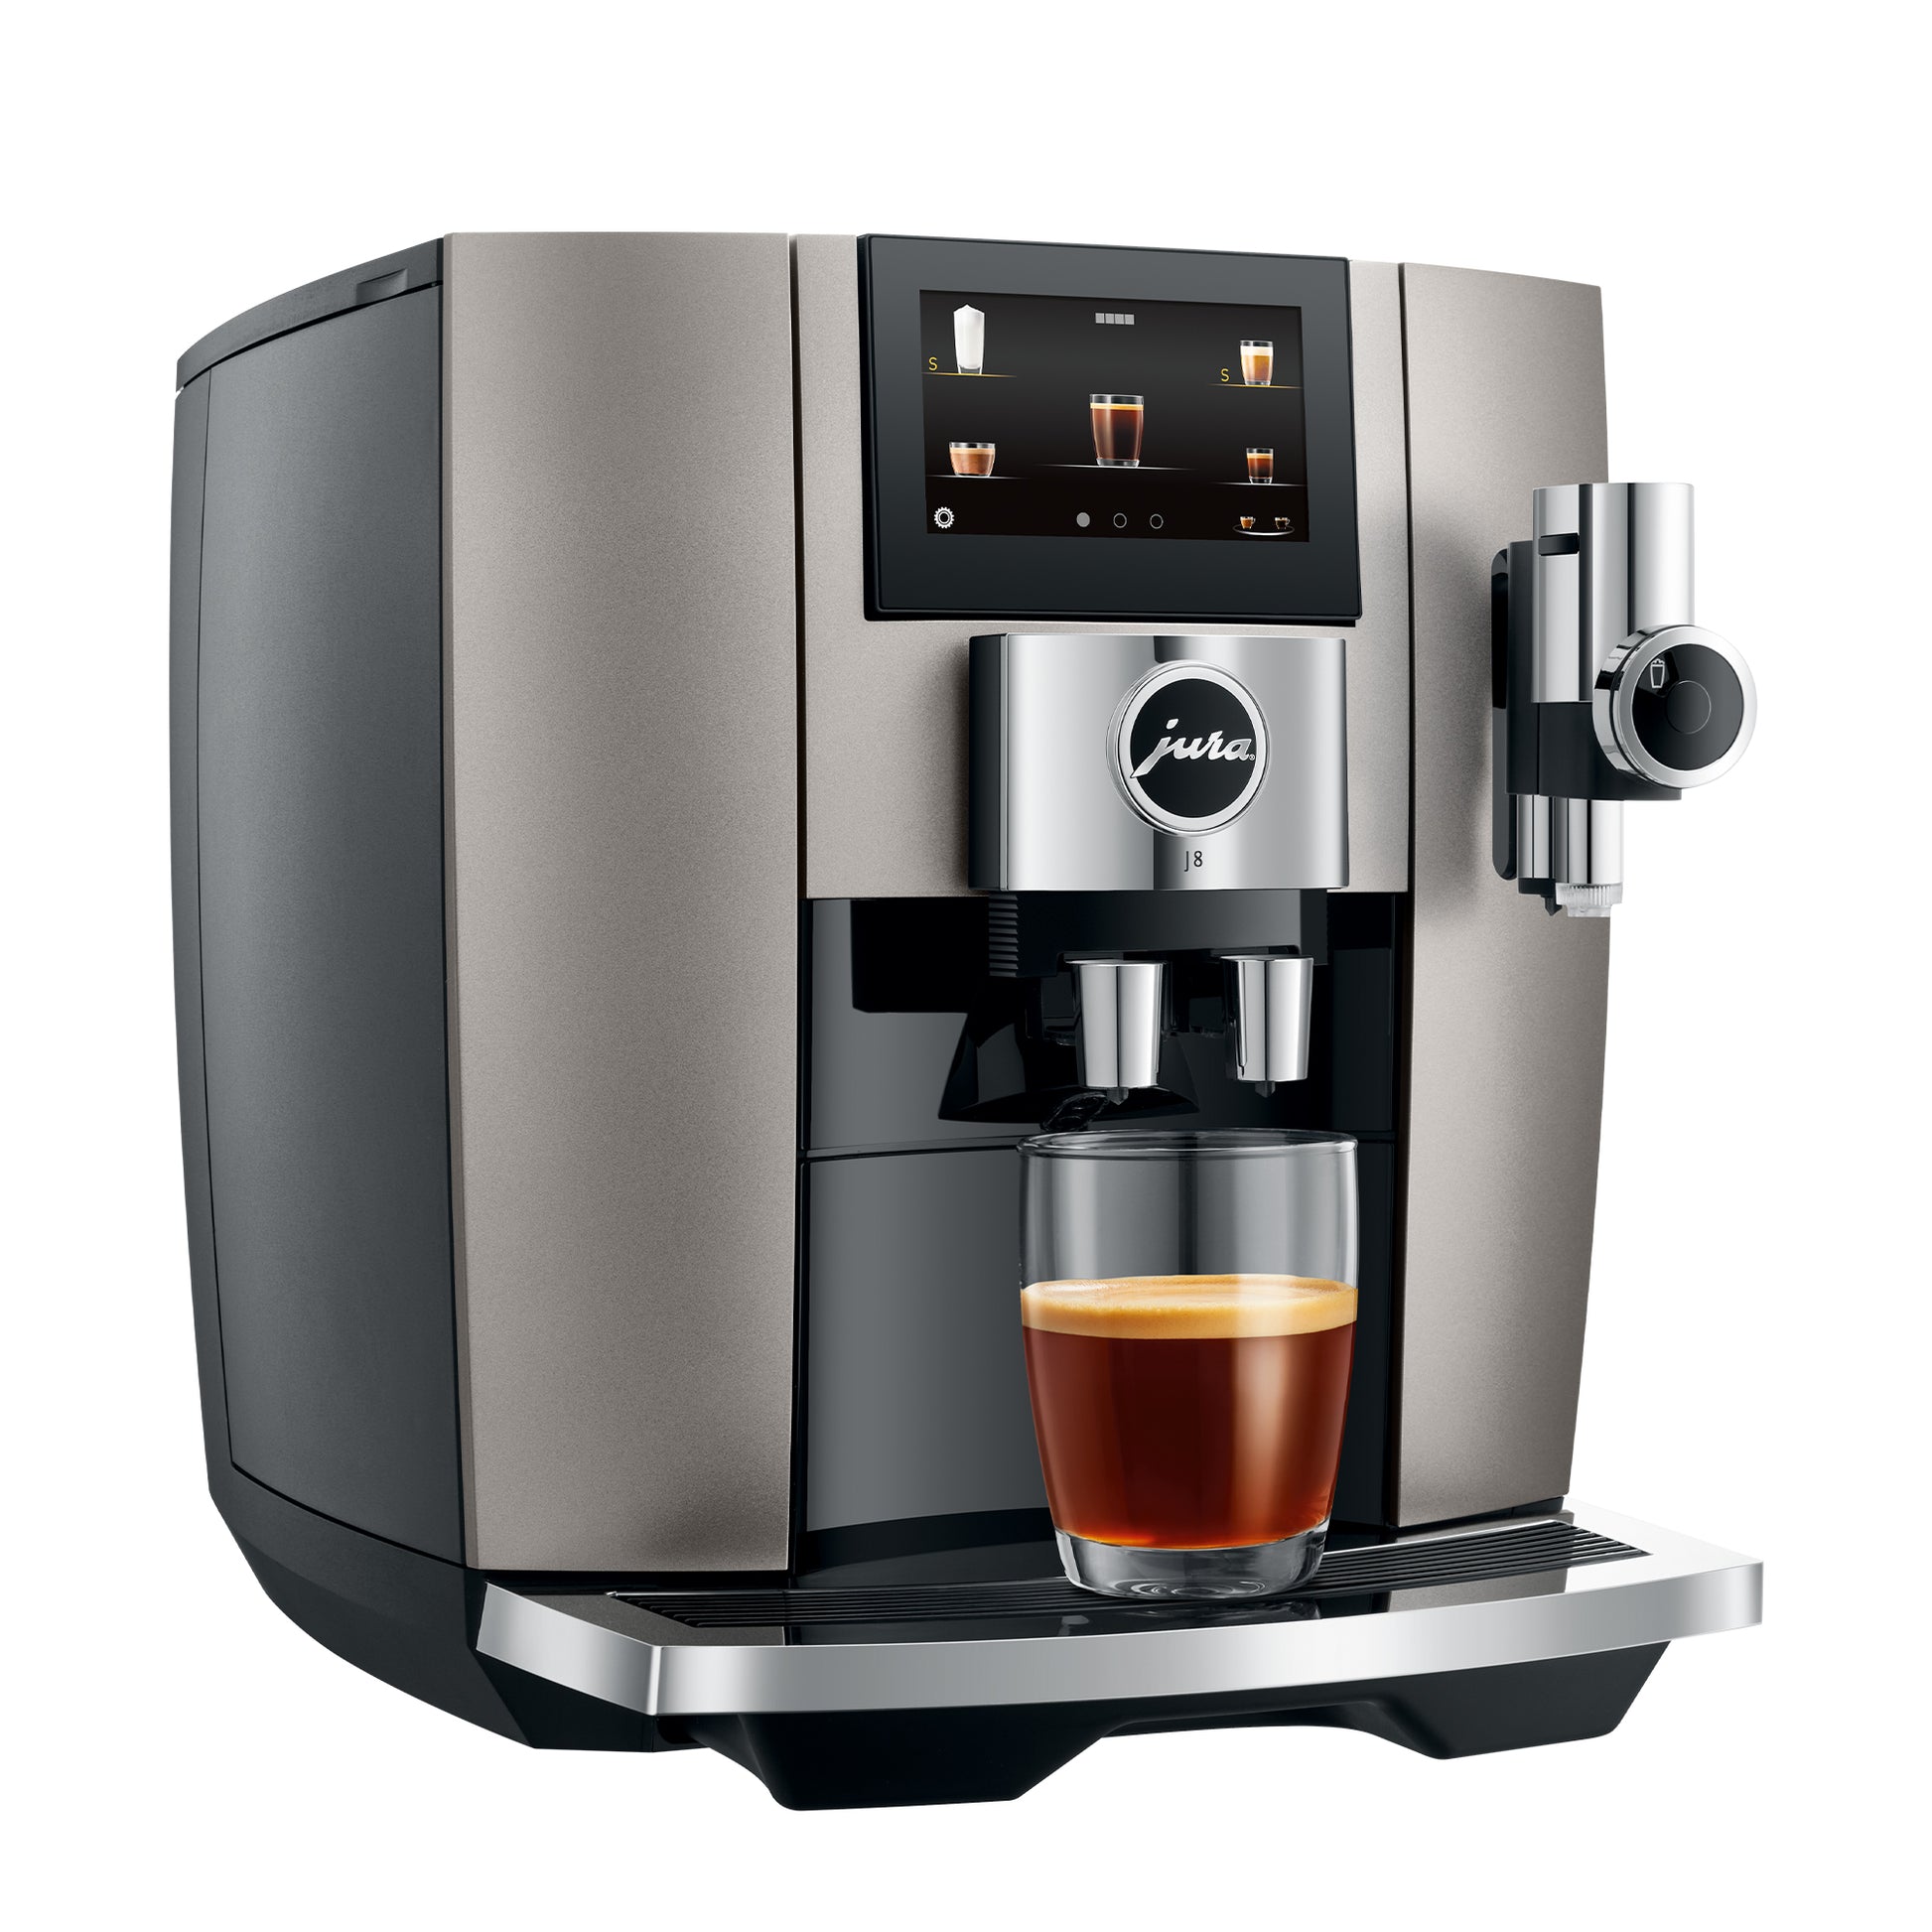 New Cold Brew Tea and Coffee Machine Debuts, Features Innovative